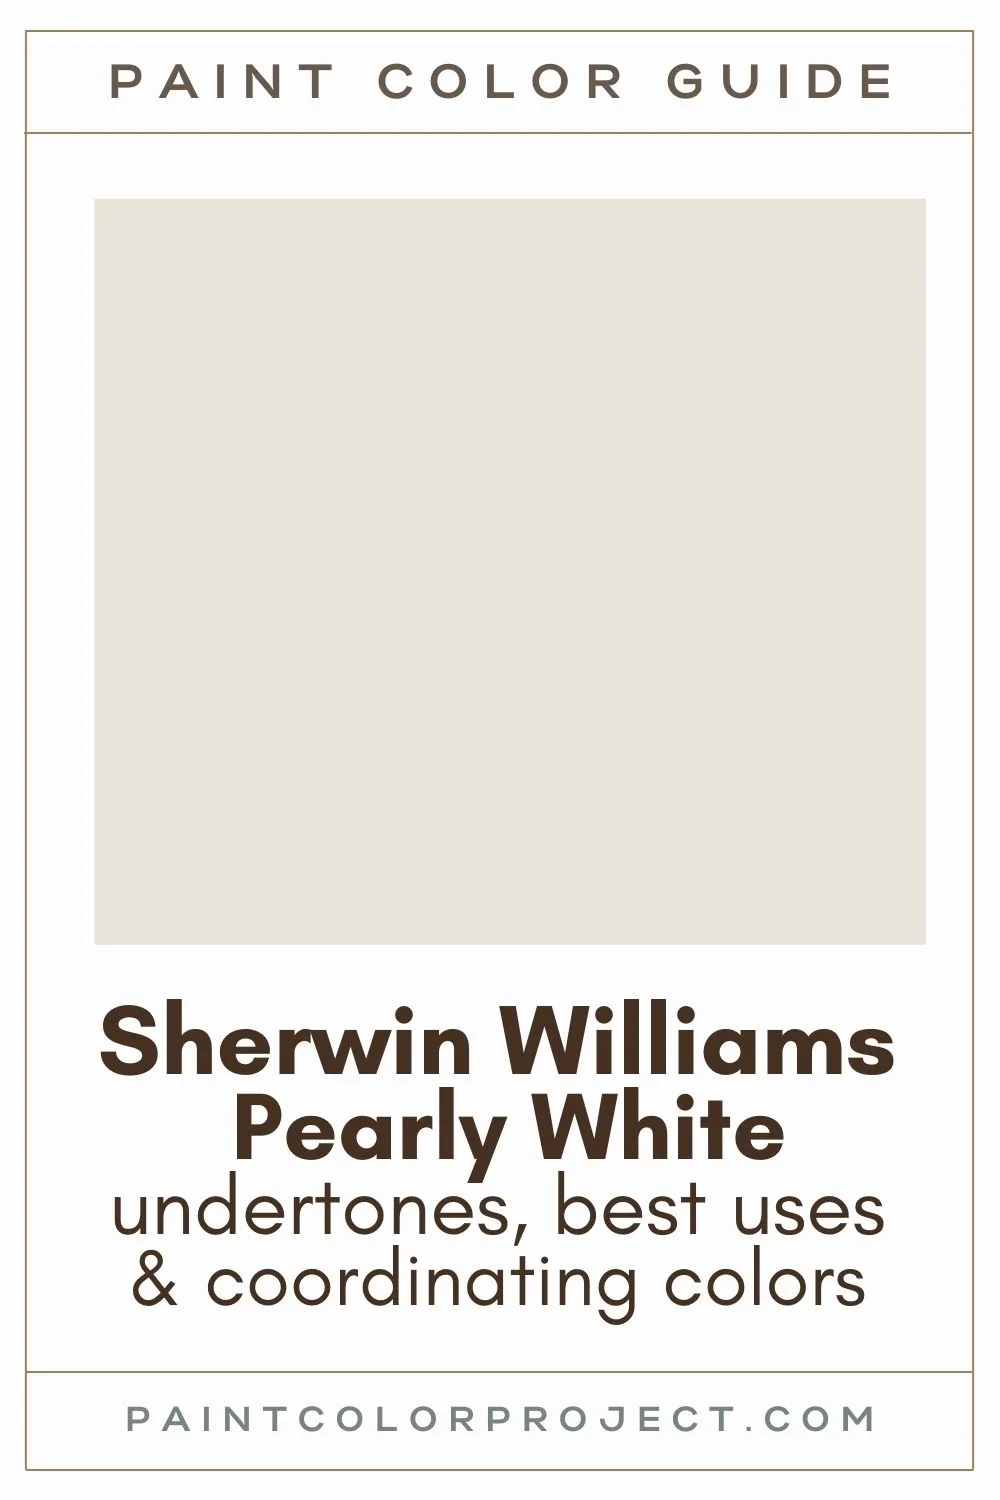 Sherwin Williams Pearly White paint color guide